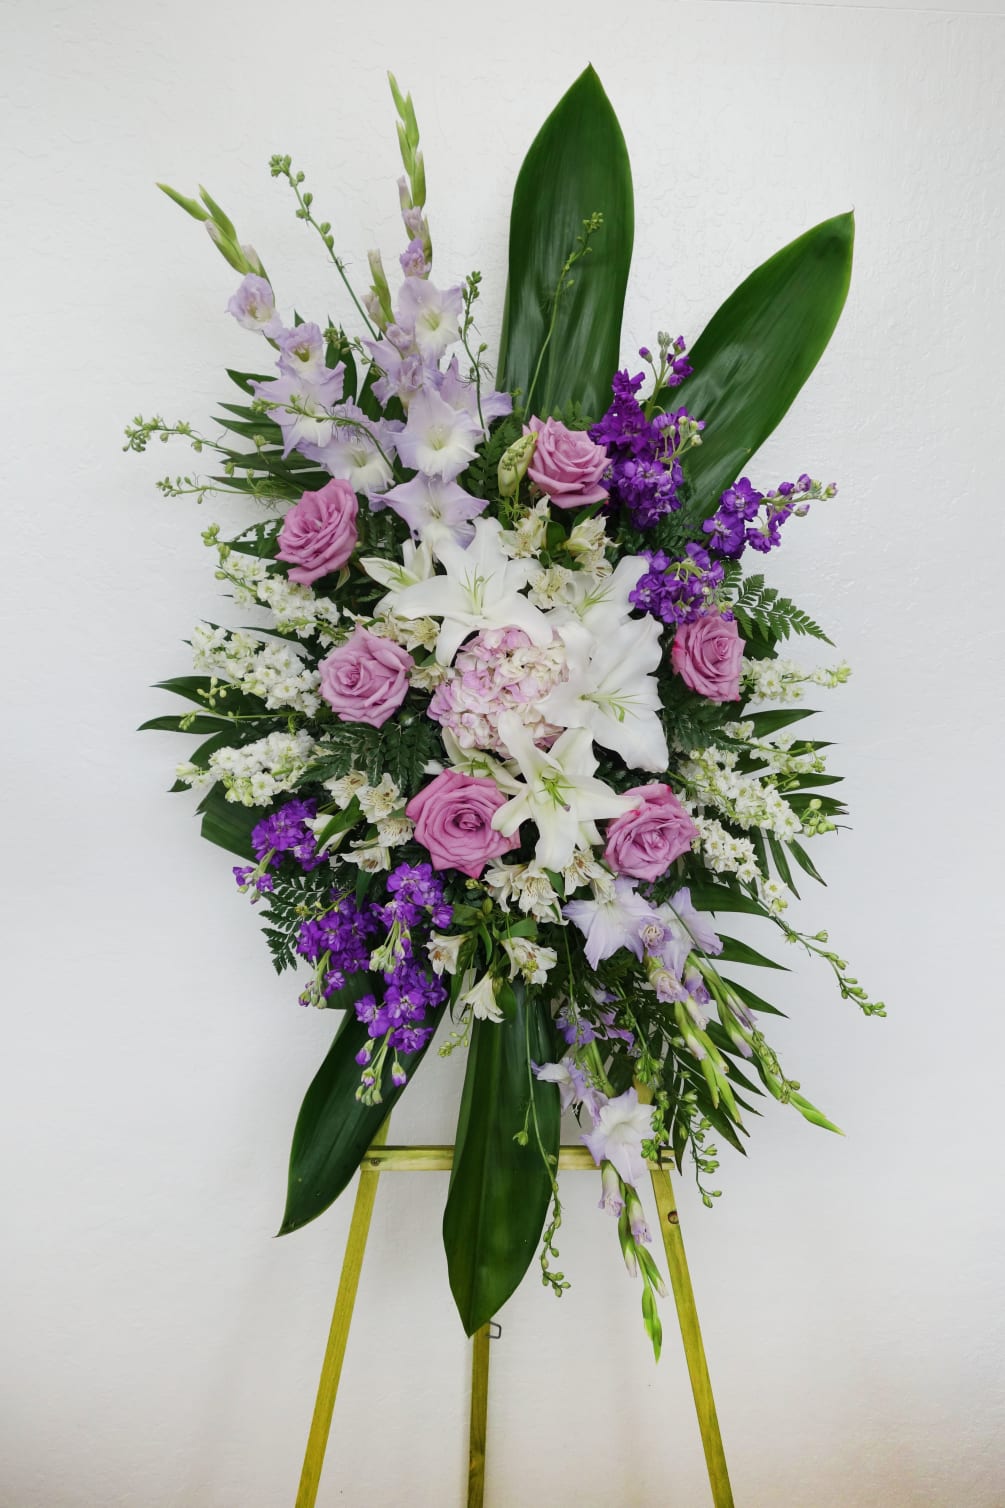 Send off loved ones with this bright and beautiful spray of lilies